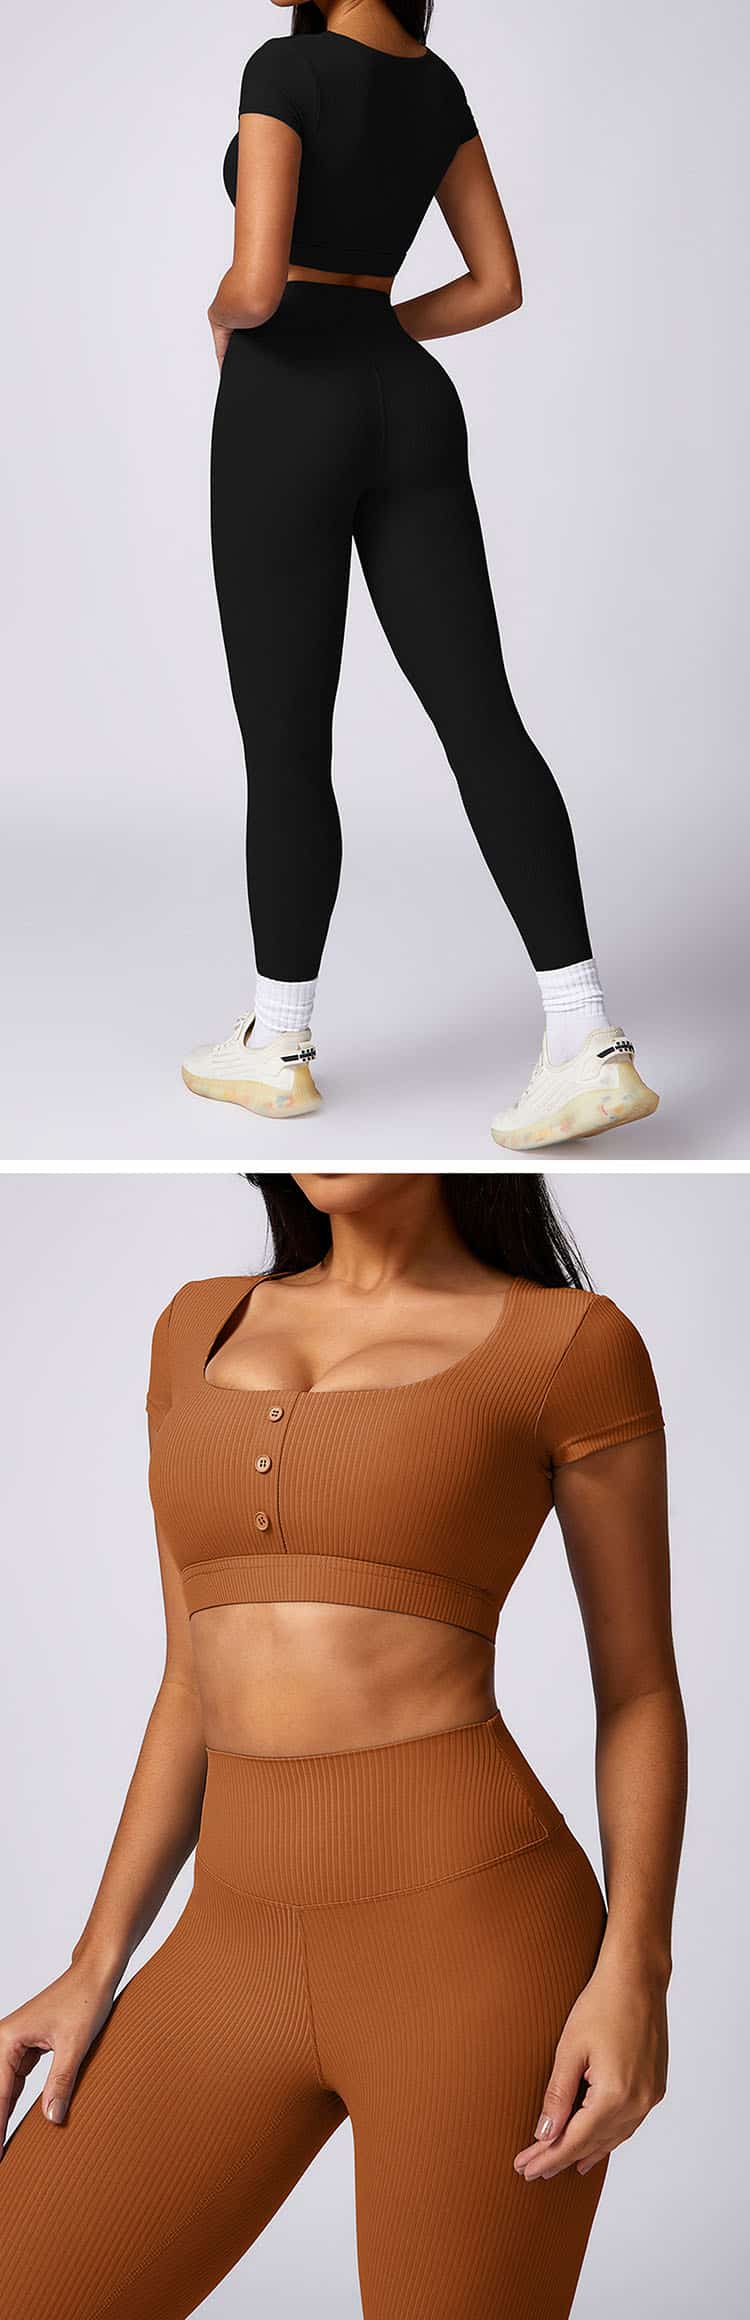 The hem adopts elastic design to fit the body